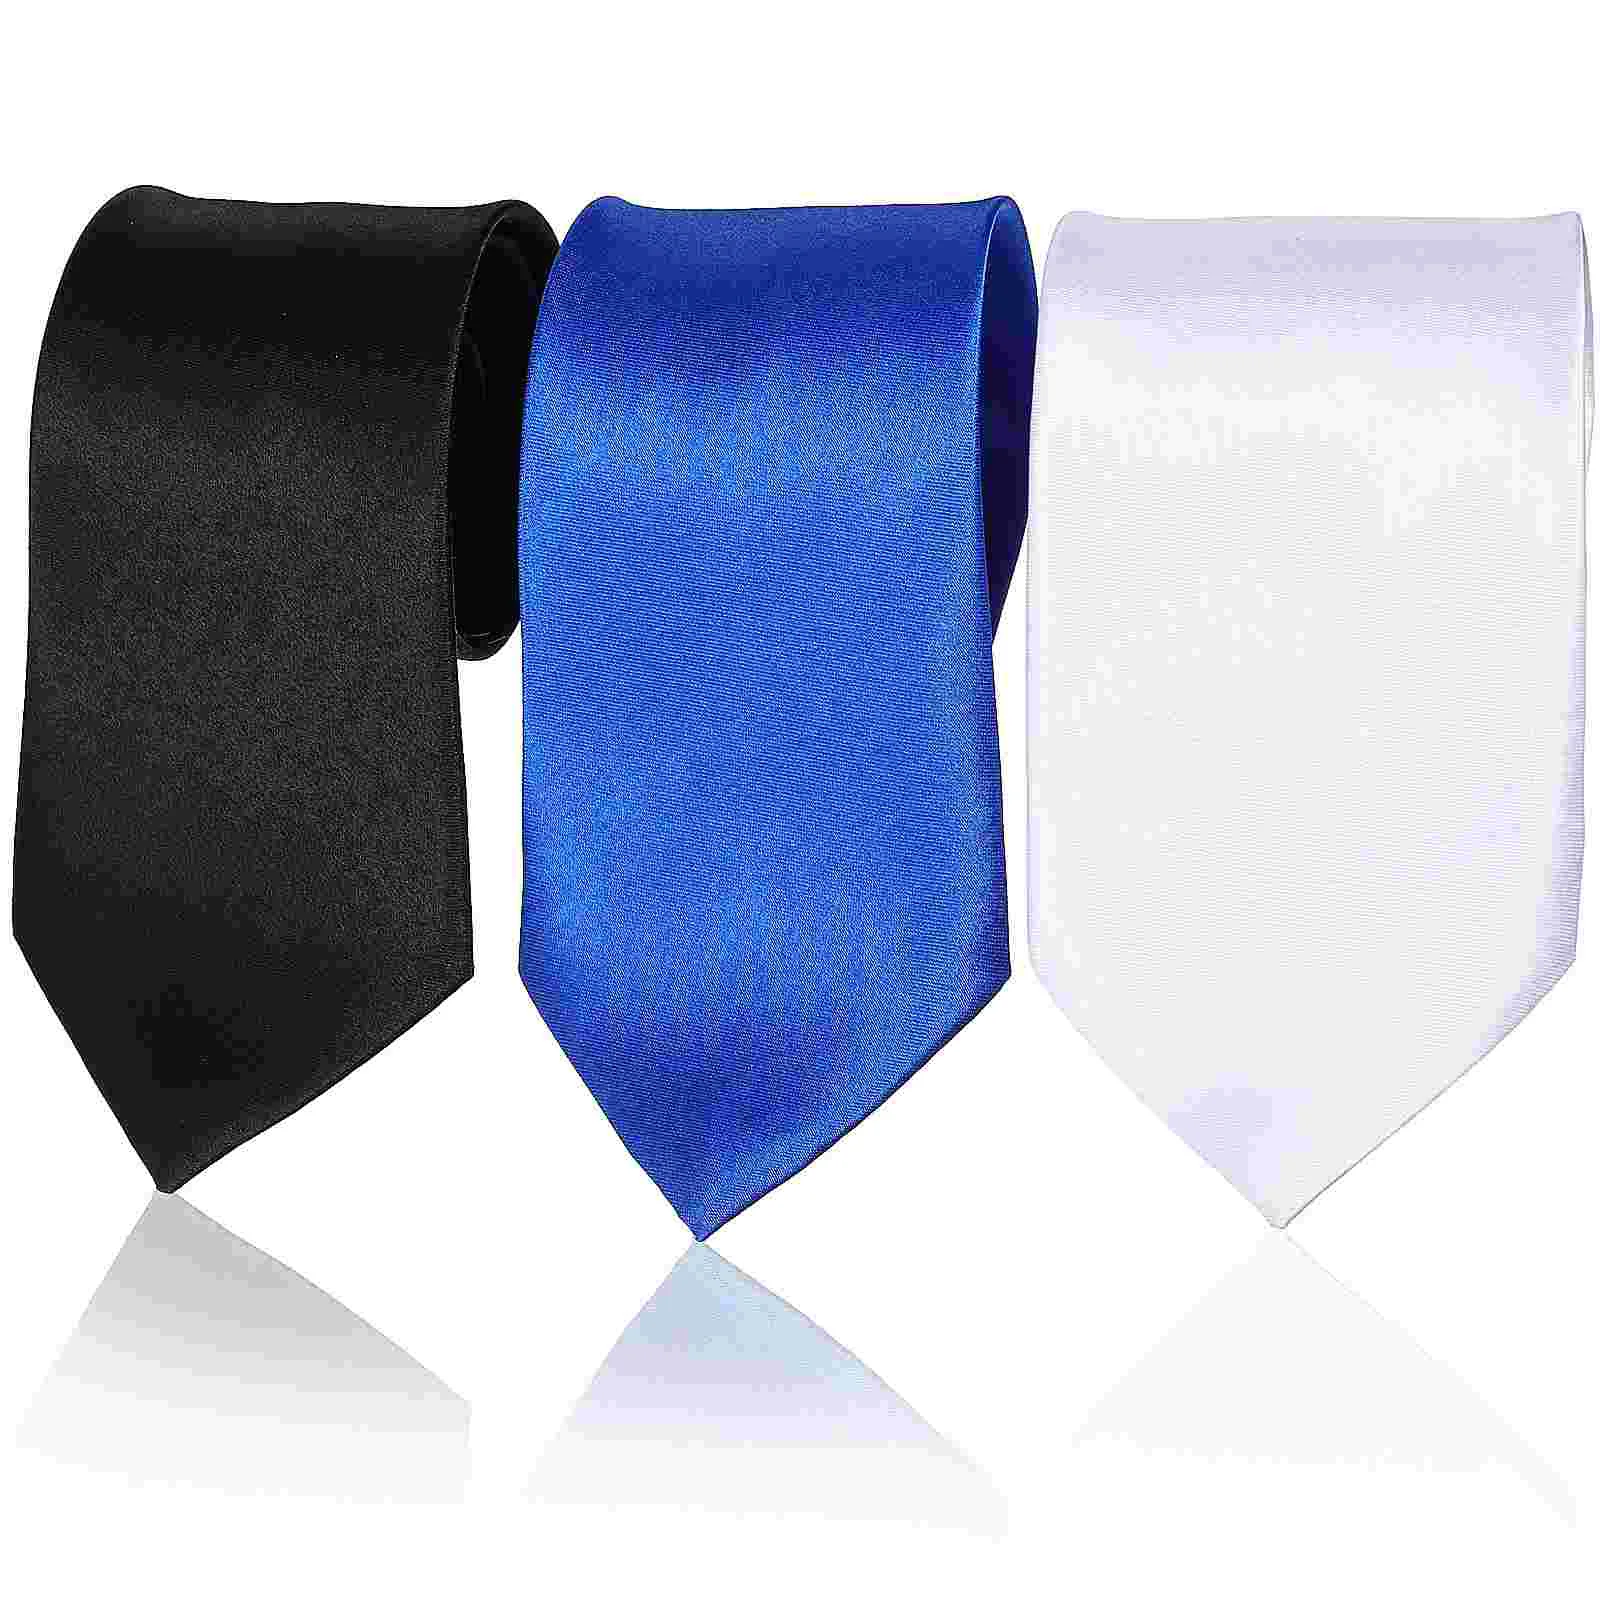 

3 Pcs Satin Ties for Men Solid Color Smooth Touch Formal Neckties Suit Accessories Ties for Wedding Banquet Parties